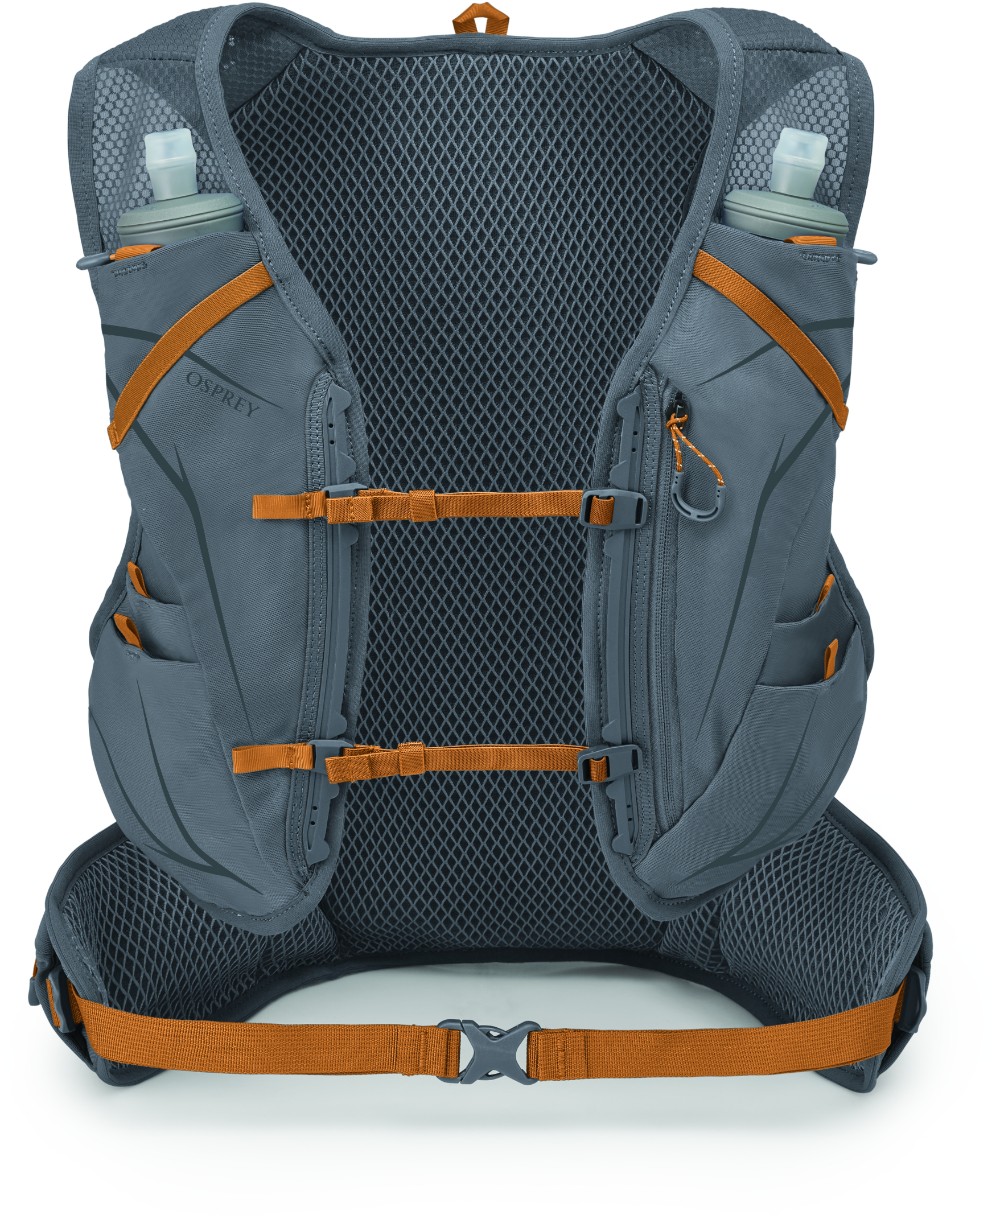 Duro 15 Hydration Pack with Flasks image 1